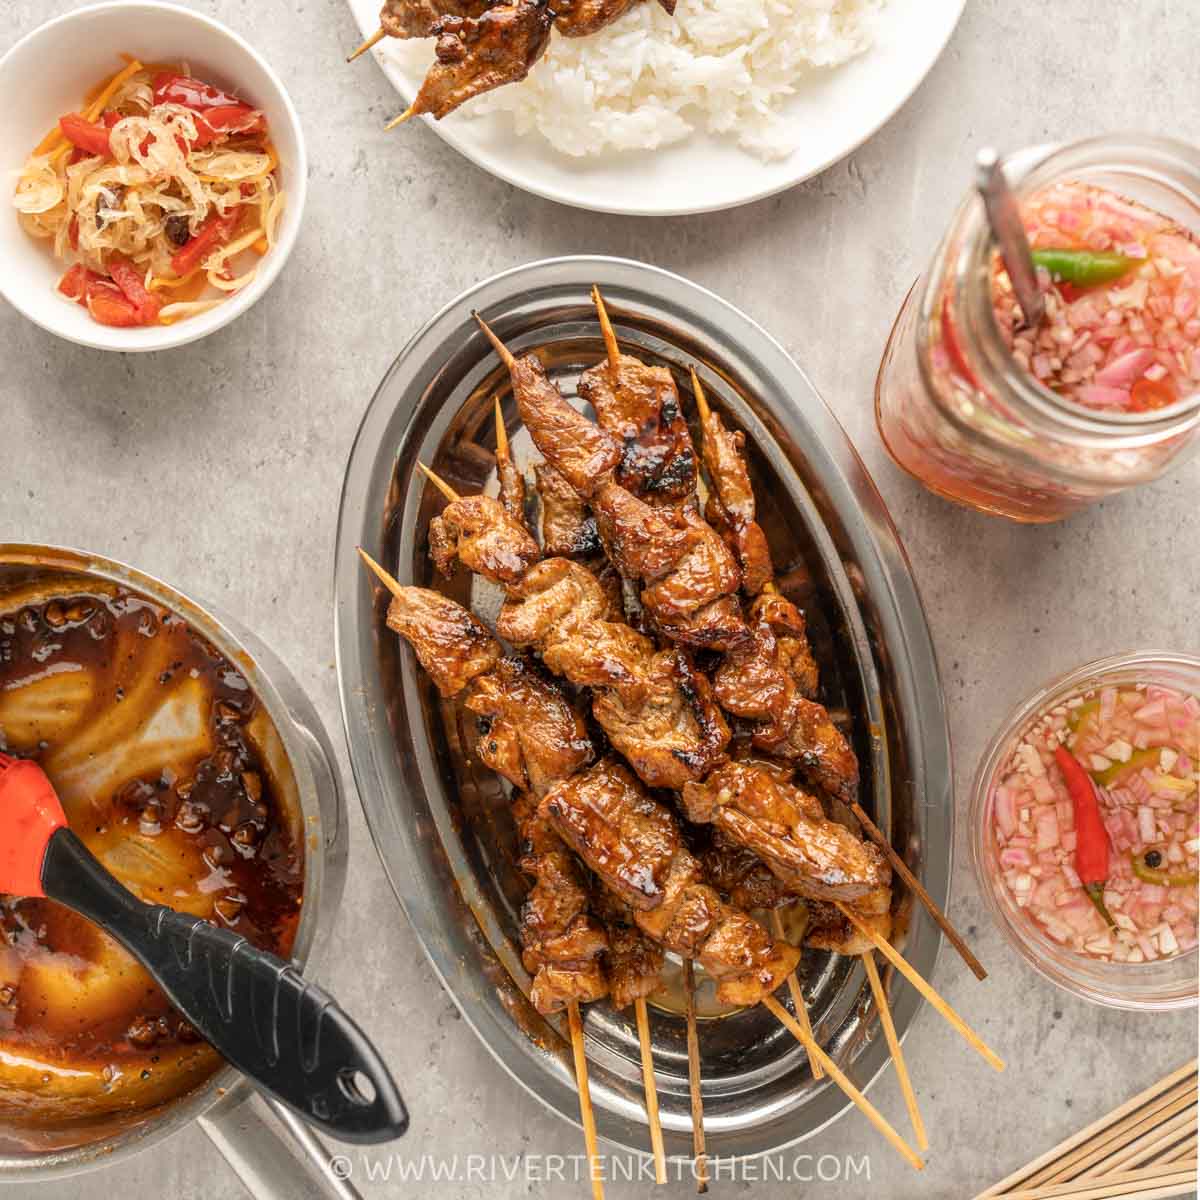 Filipino Pork BBQ Skewers (Grill, Oven, or Air-Fry)